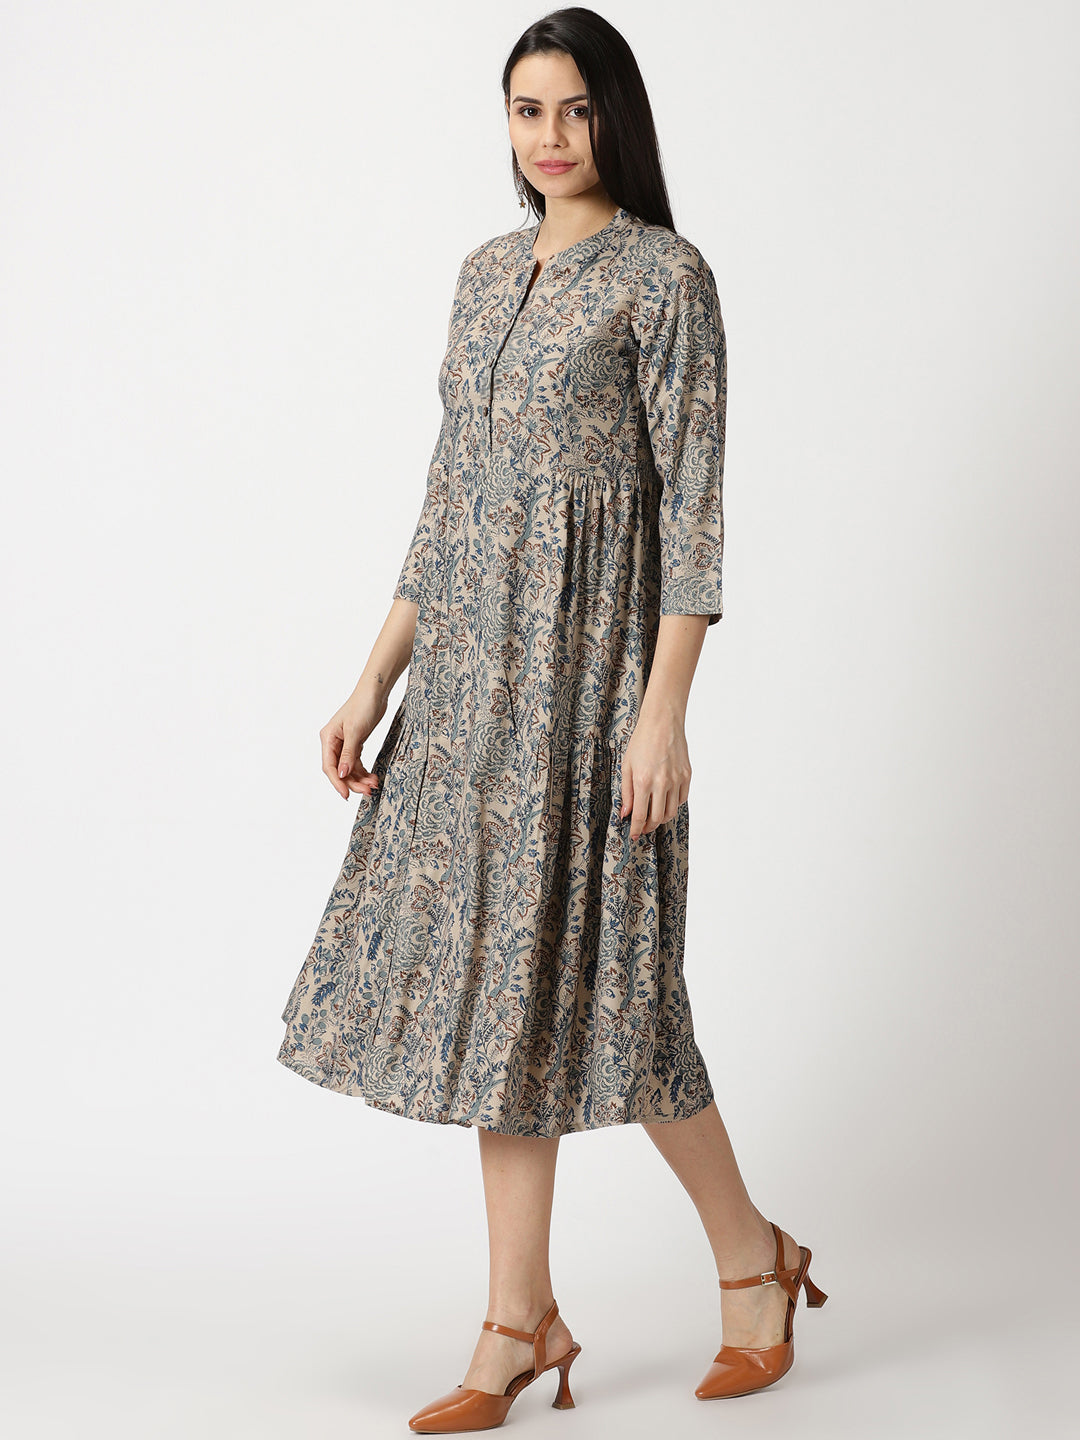 Beige Ethnic Floral Print Rayon Dress with Side Gathers